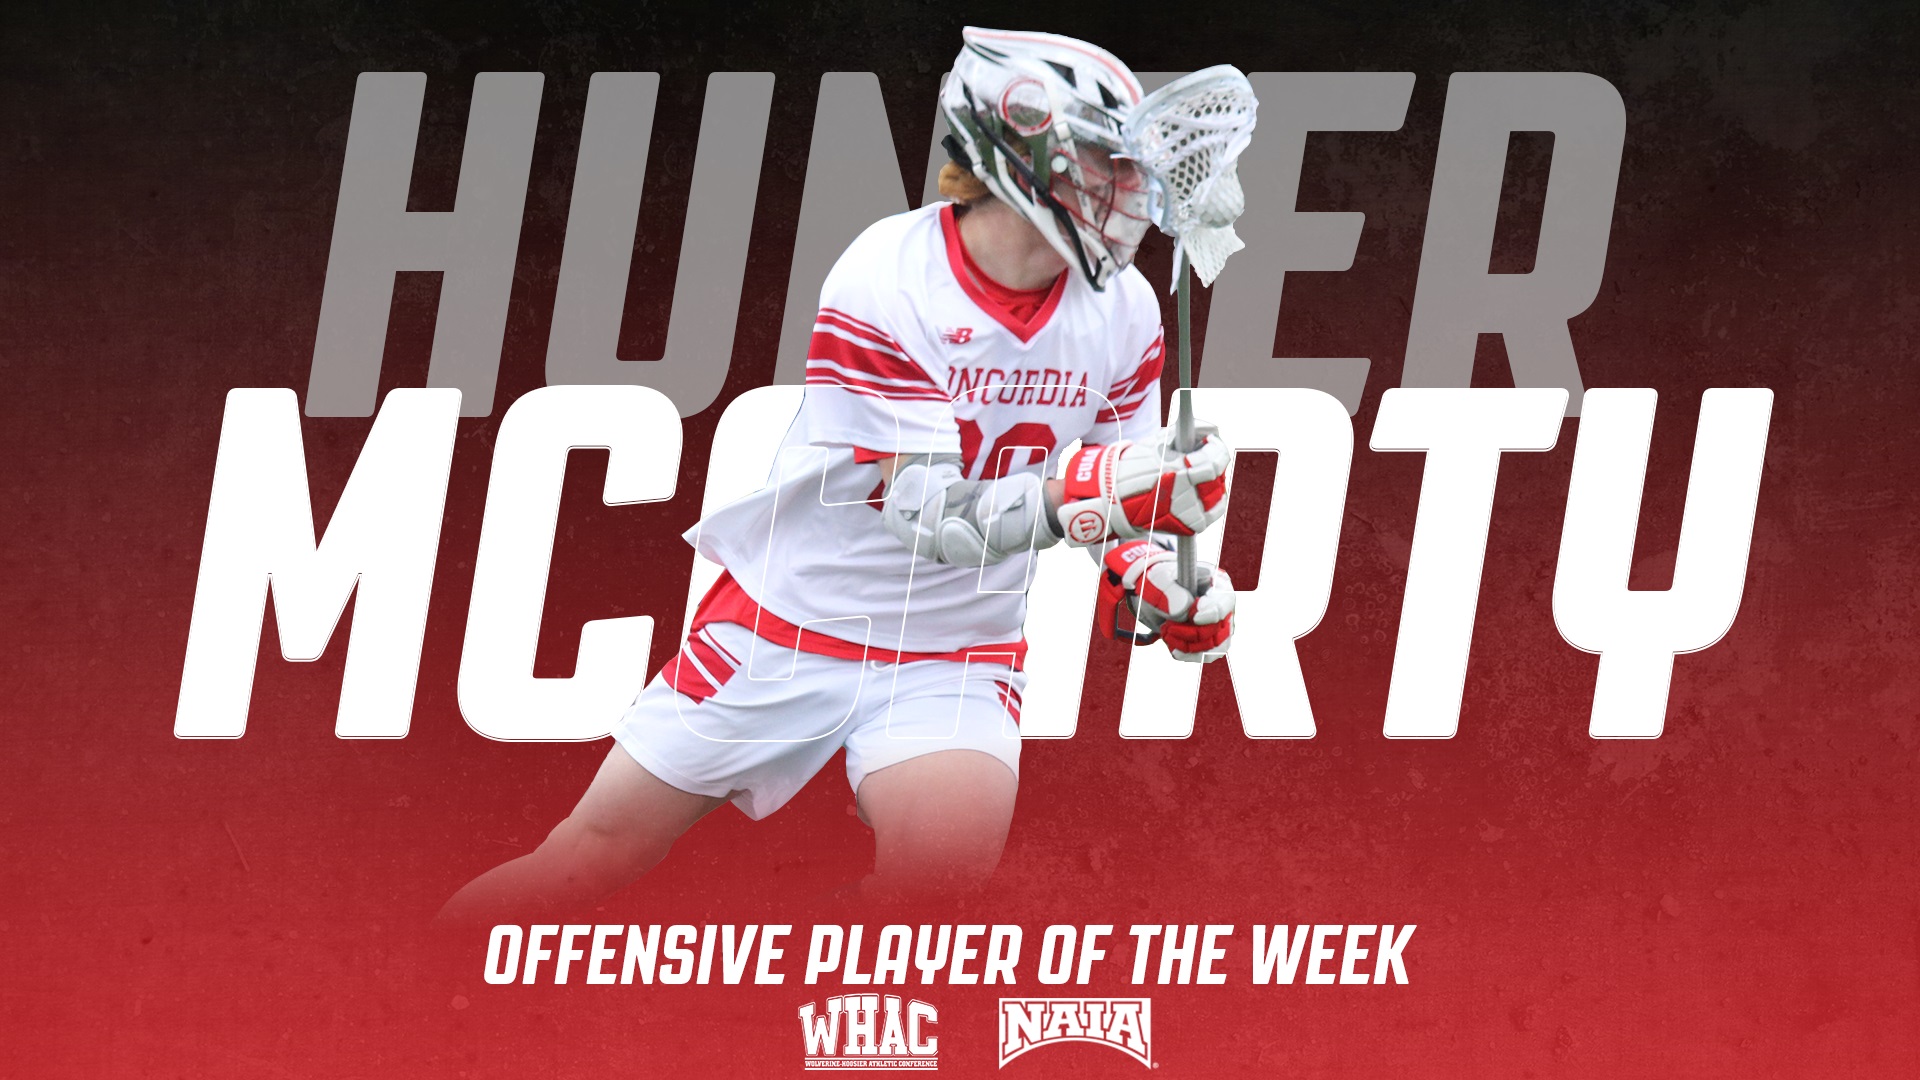 Hunter McCarty becomes the third Cardinal to be recognized by the NAIA as player of the week.